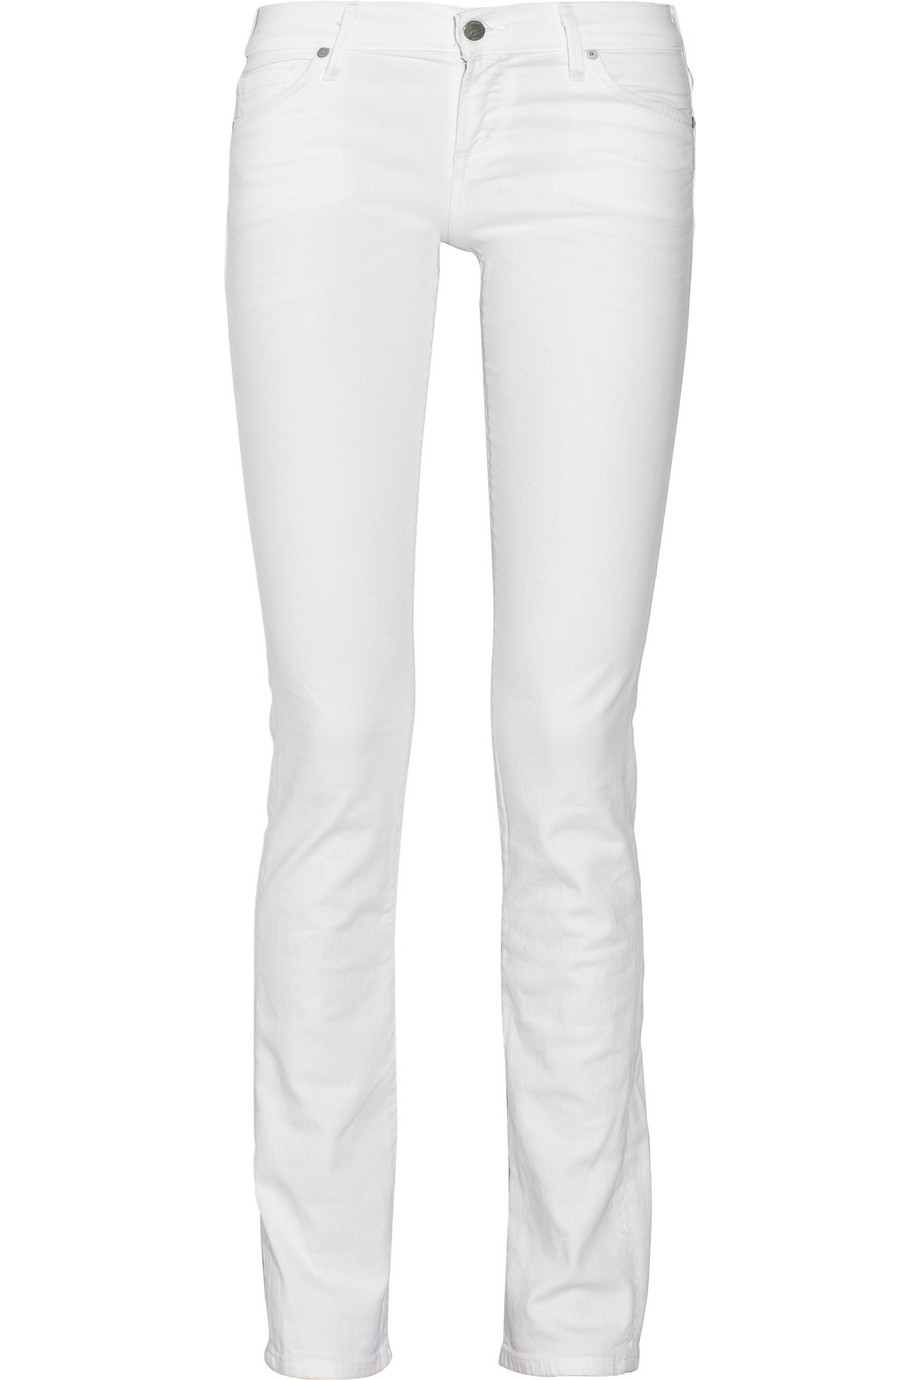 Citizens of Humanity Ava Low-rise Straight-leg Jeans in White